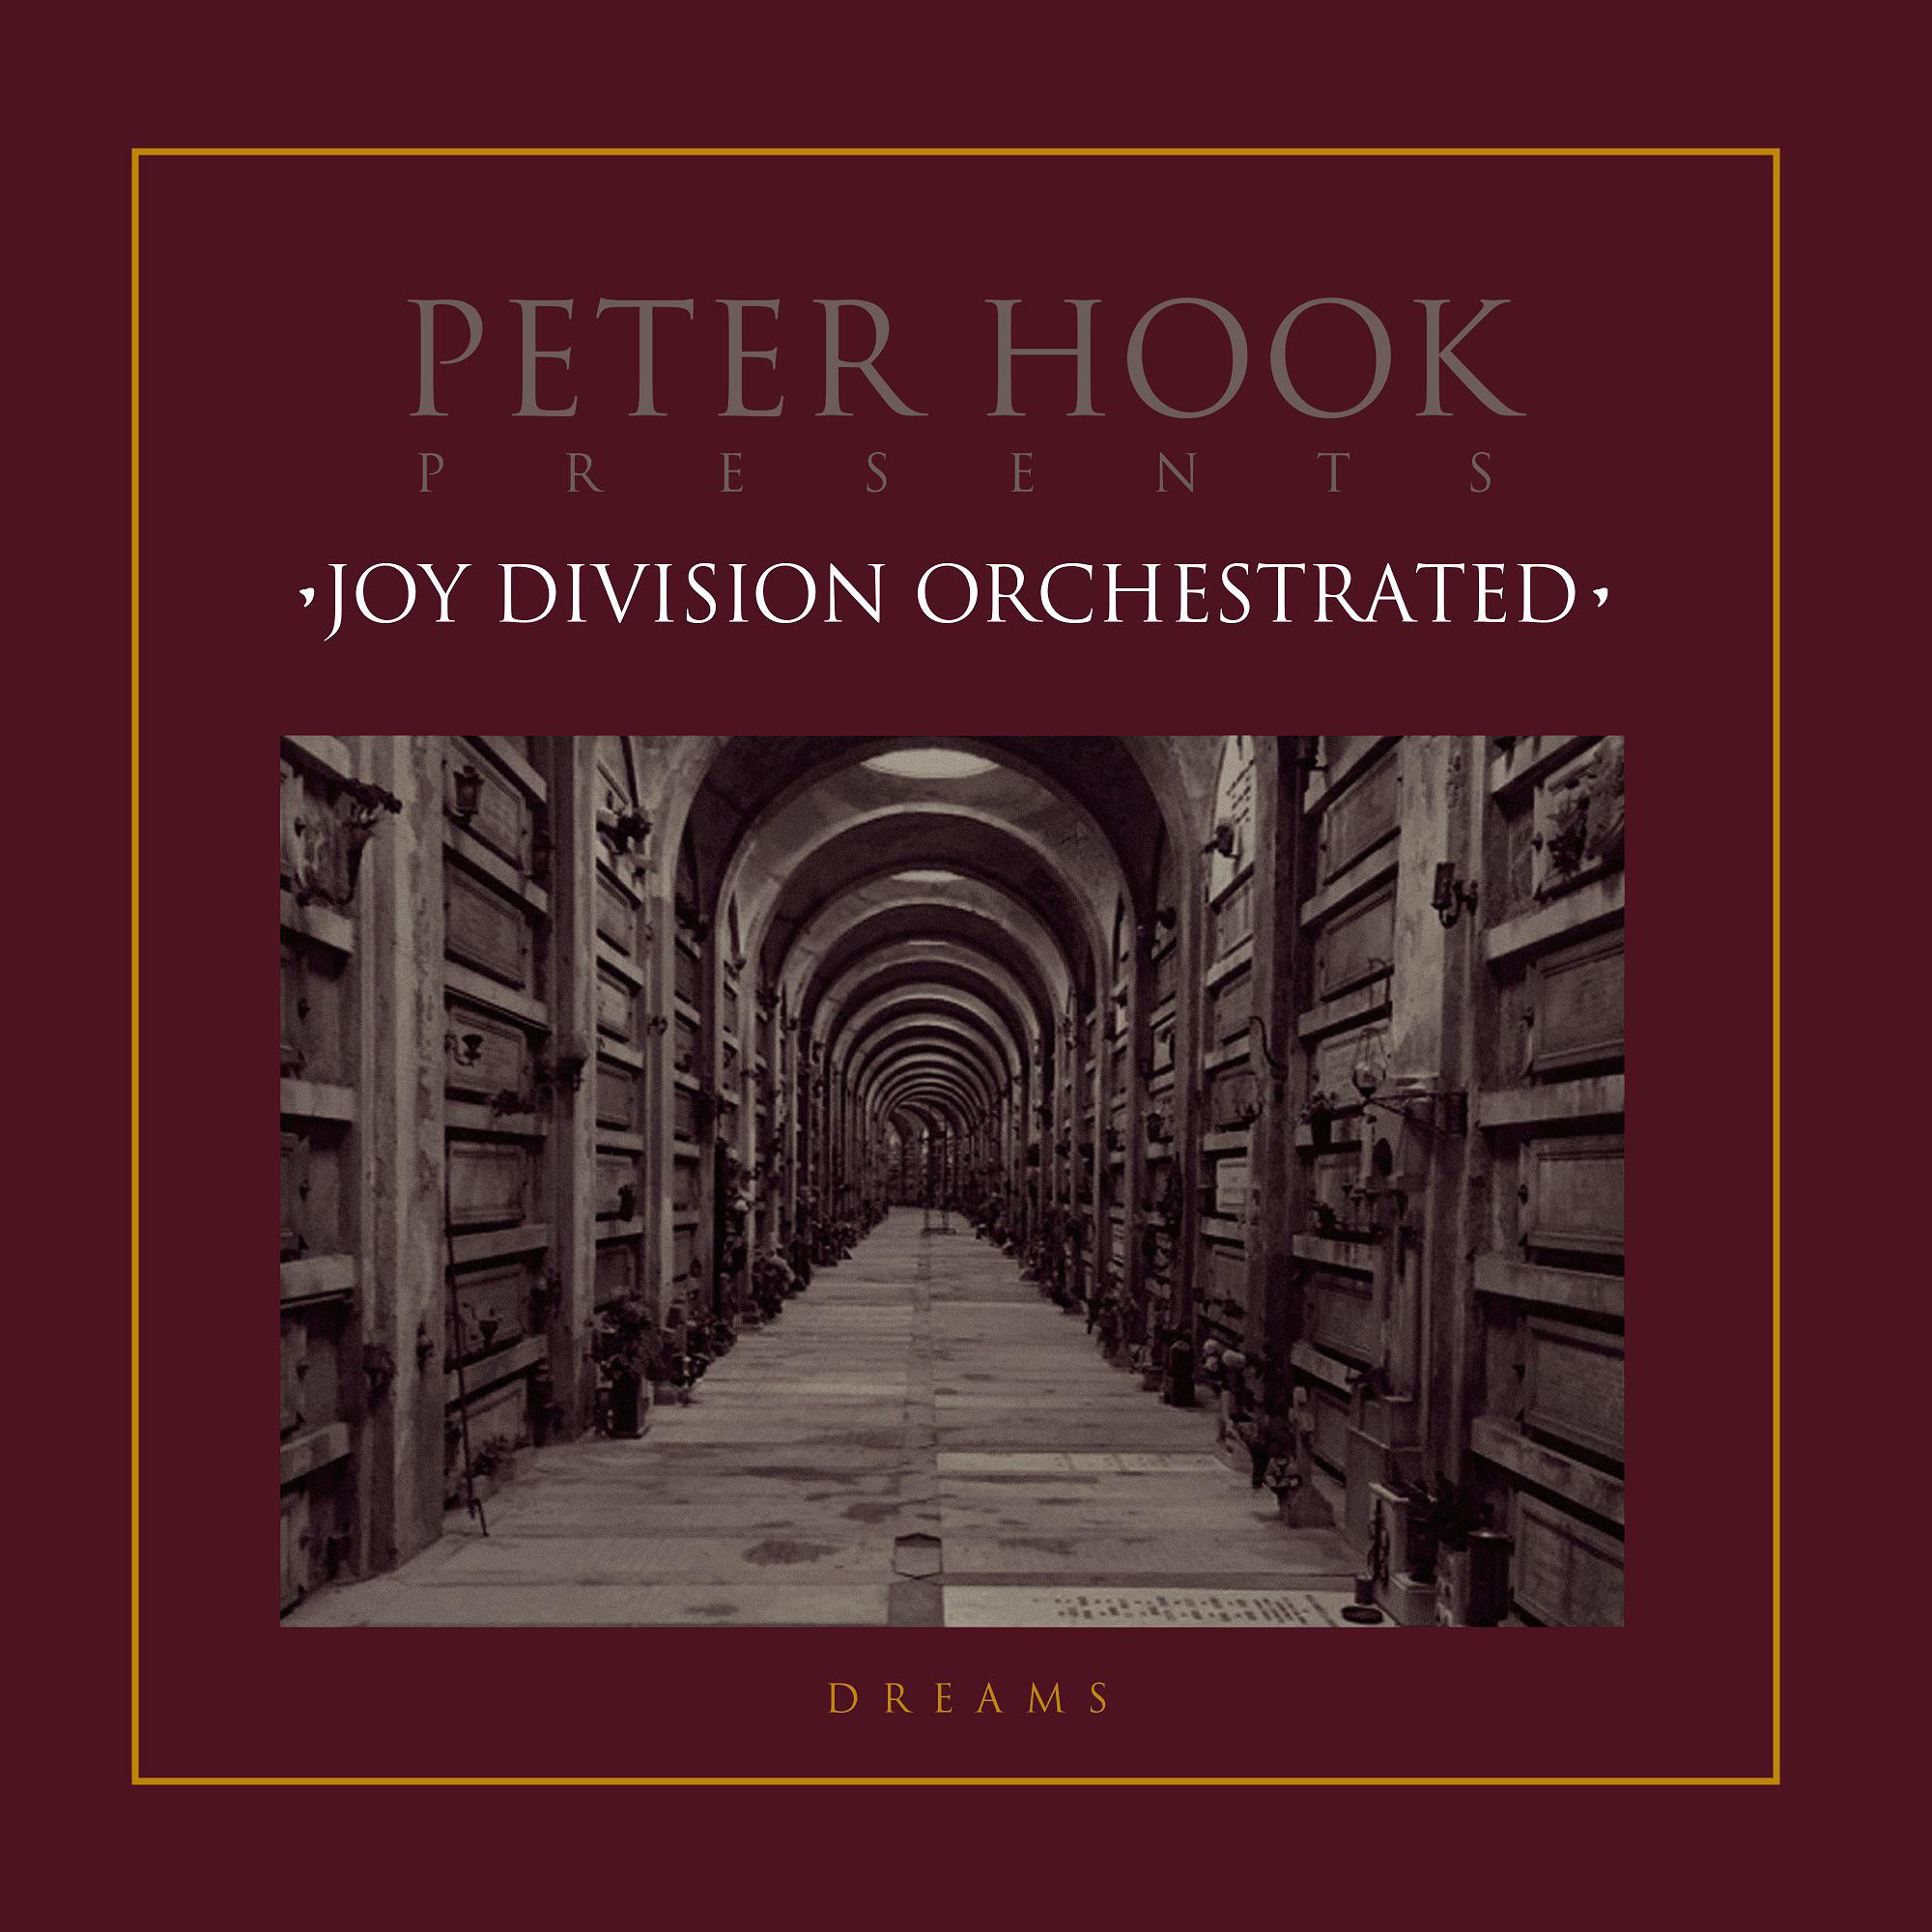 Peter Hook Presents Joy Division Orchestrated (Dreams EP)